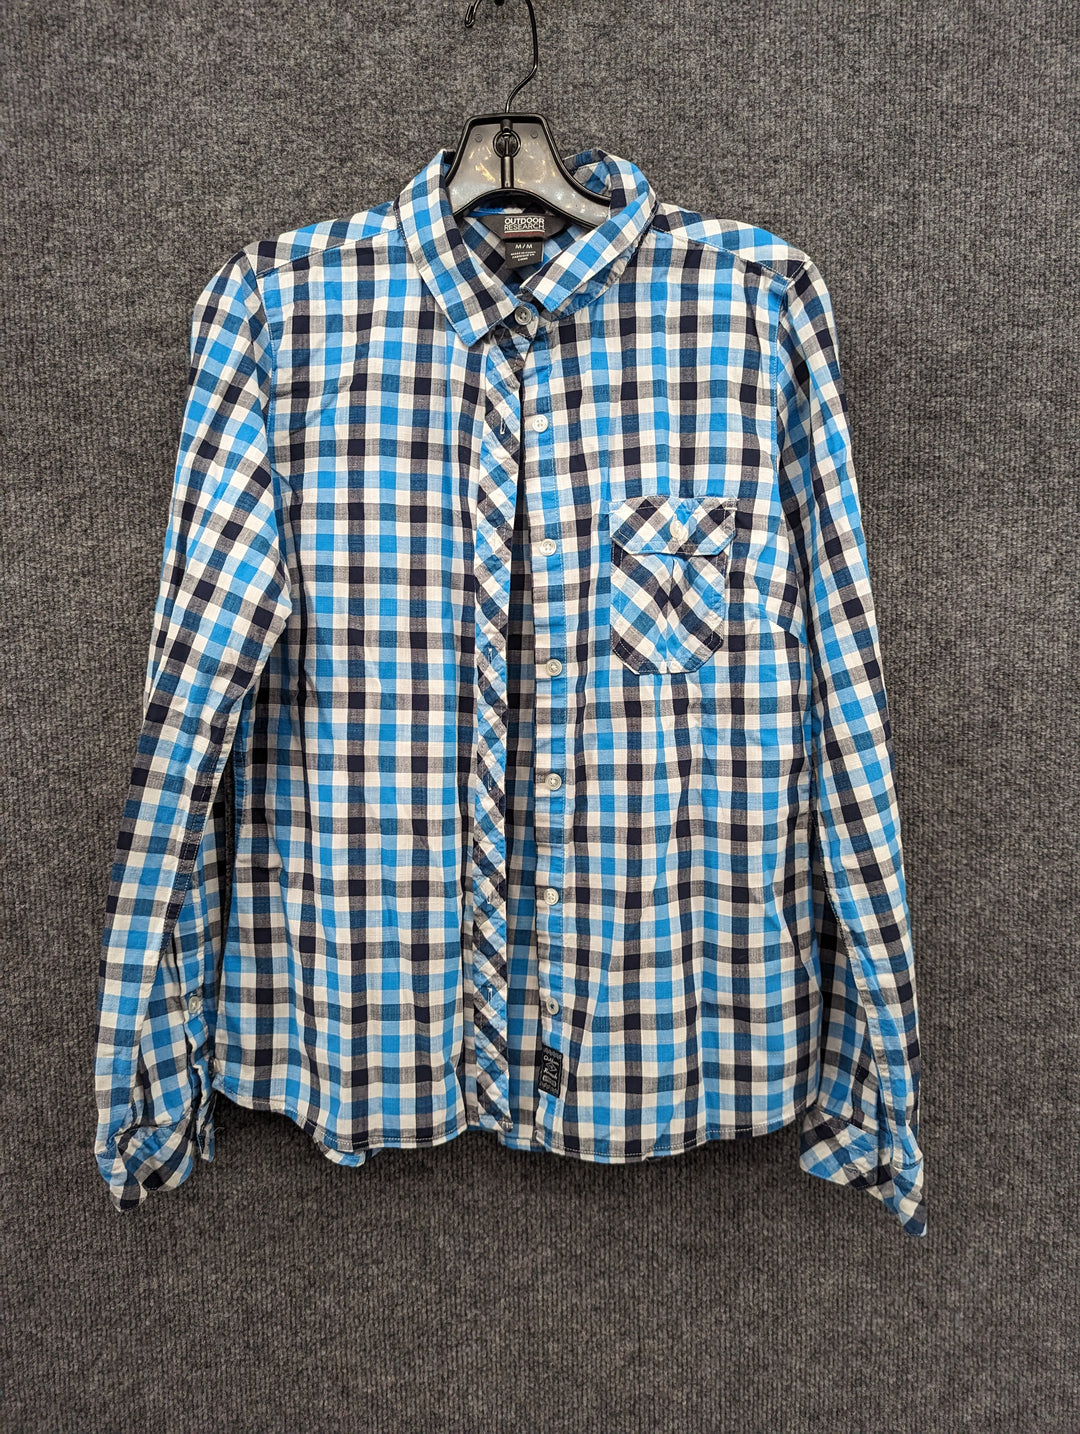 Outdoor Research Size W Medium Women's L/S Button Up